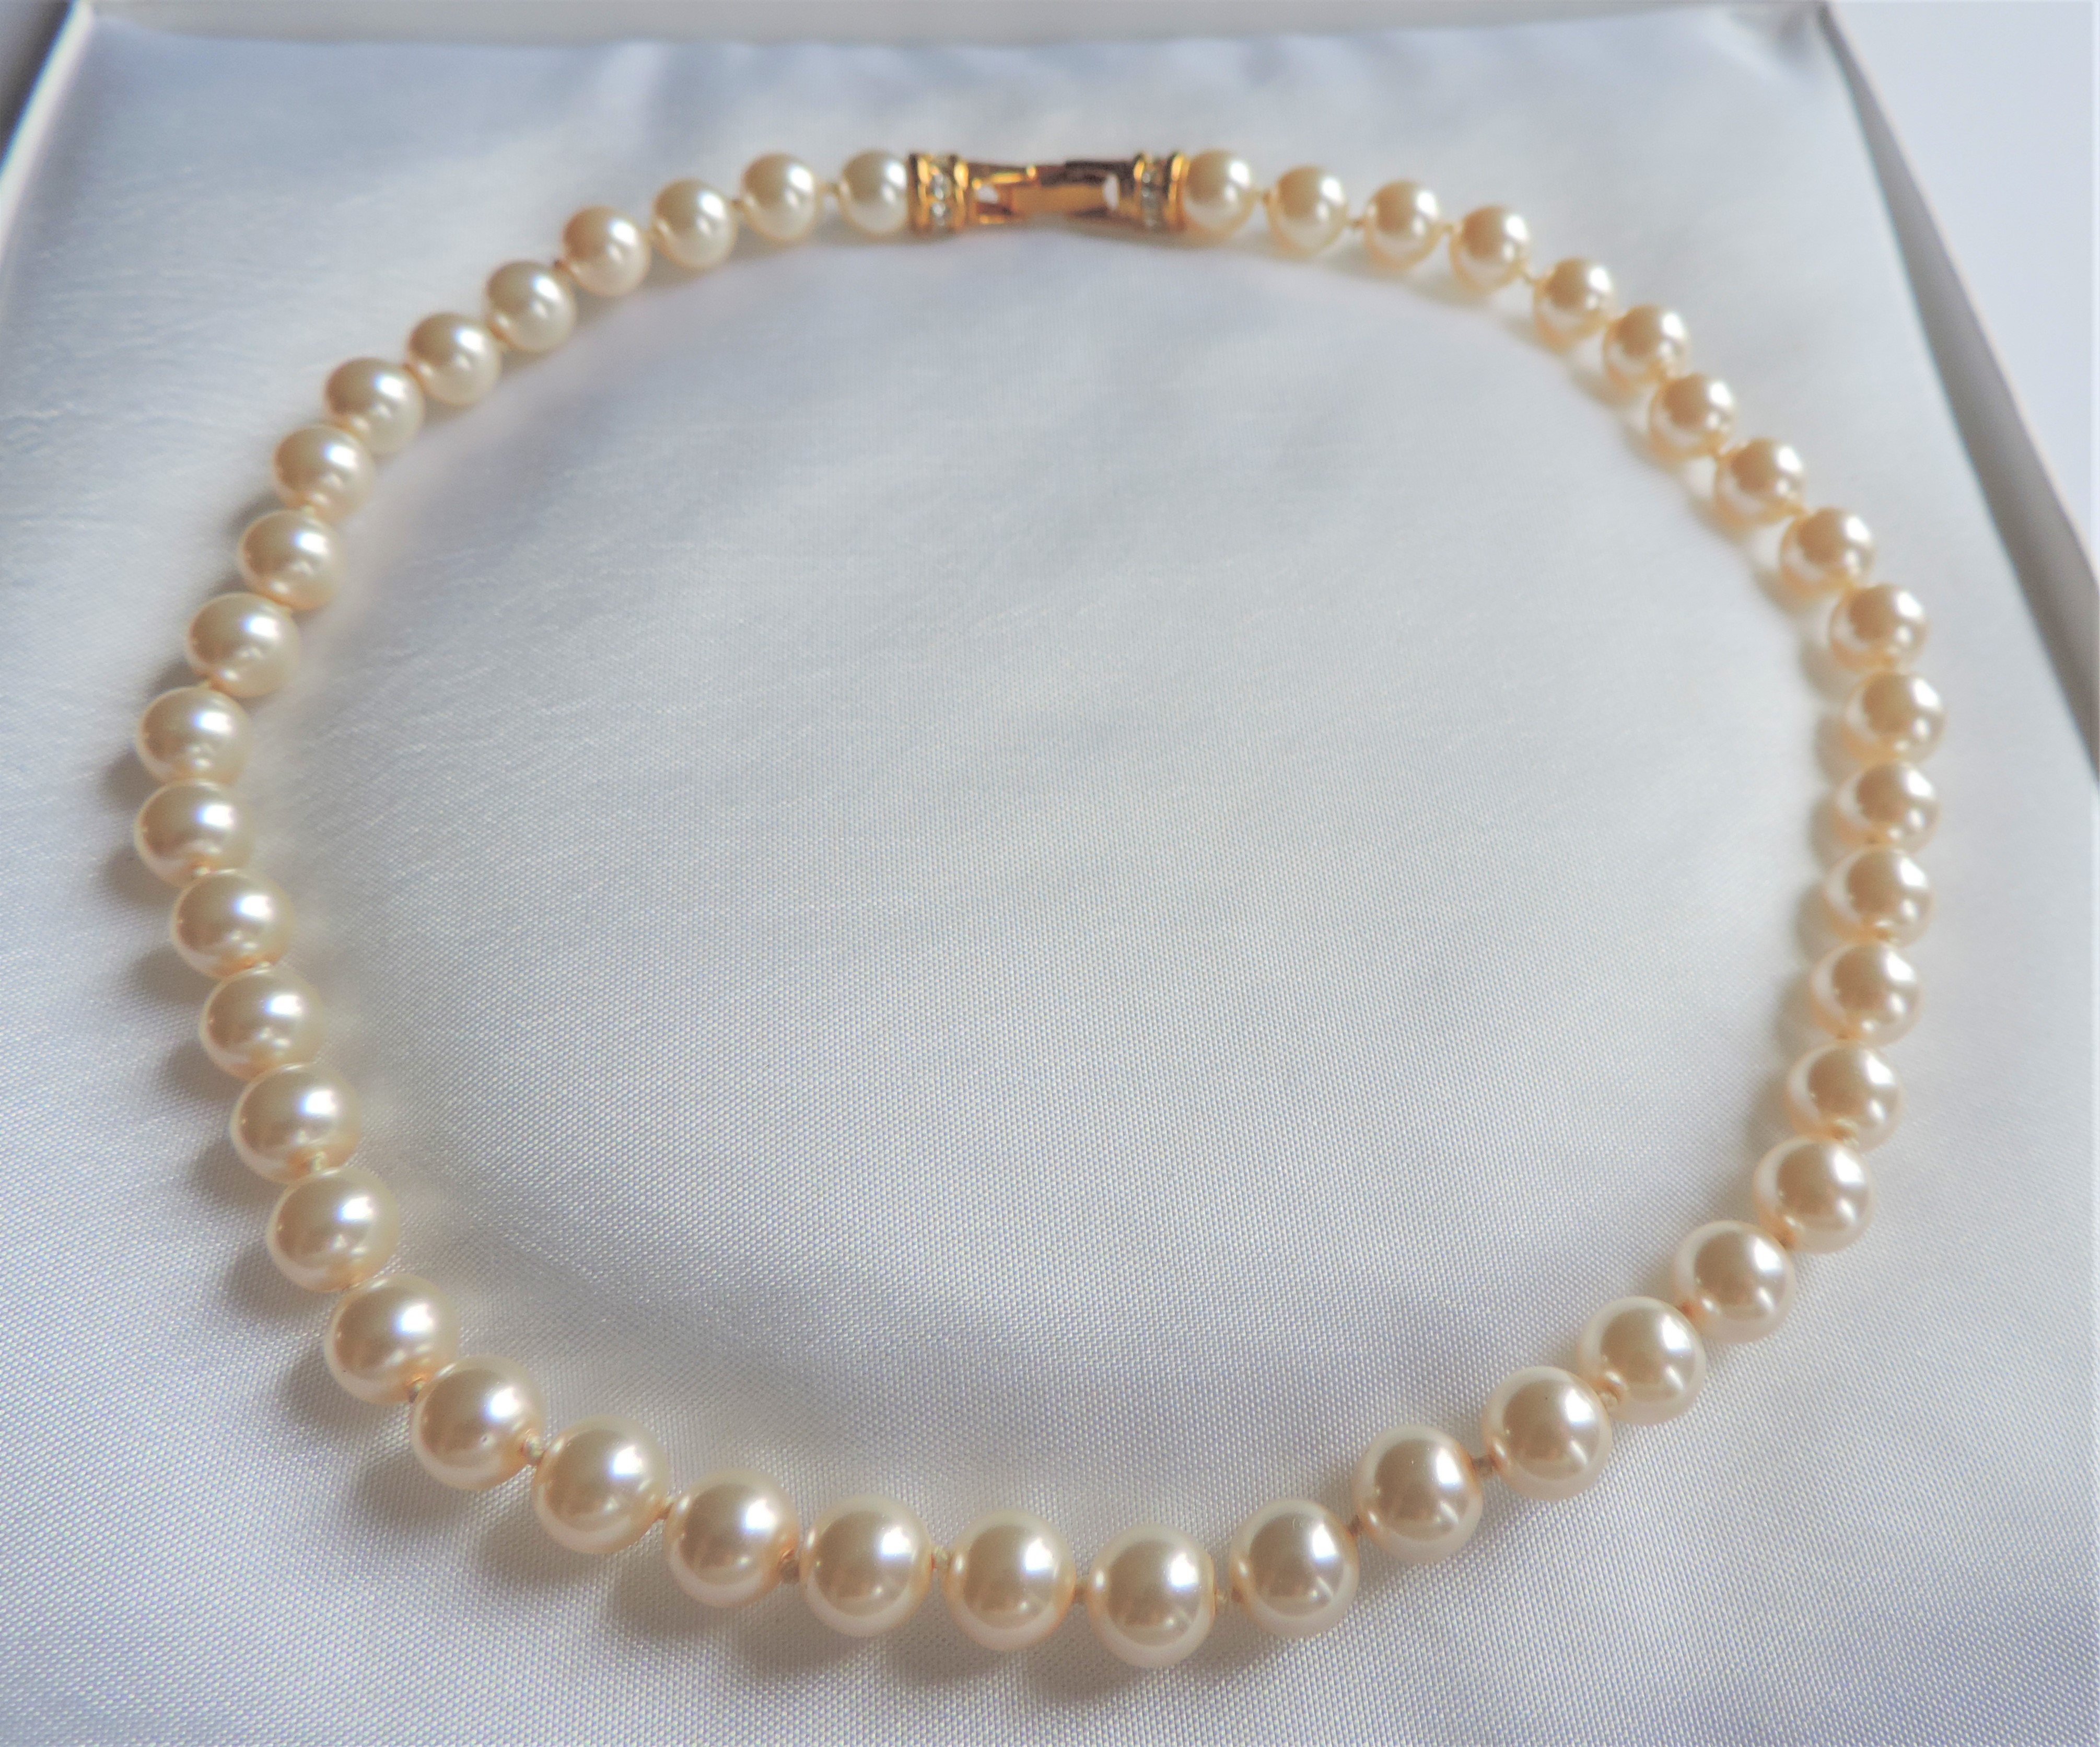 Single Strand Pearl Necklace with Gift Pouch - Image 2 of 3